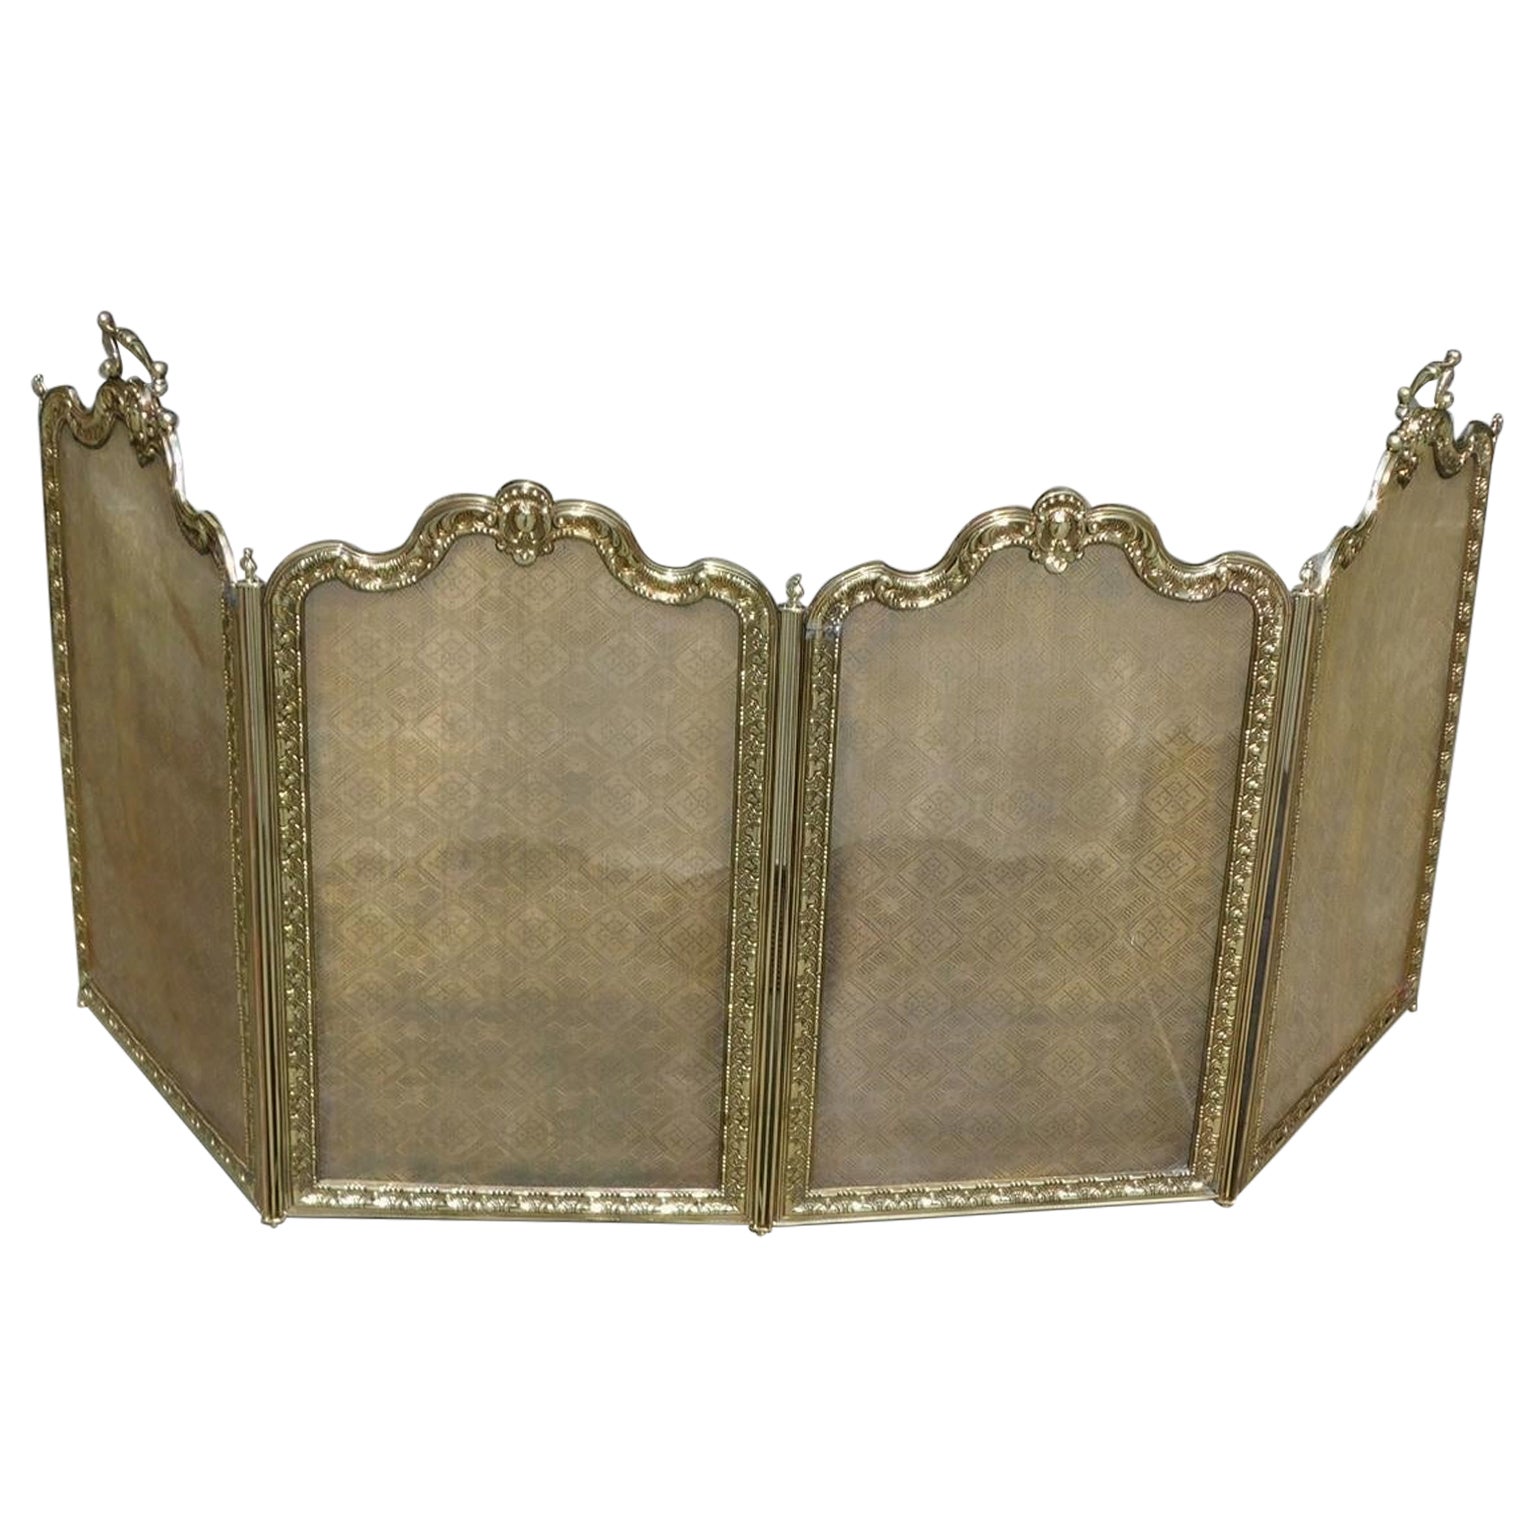 French Brass Serpentine Four Panel Decorative Foliage Fire Place Screen, C. 1830